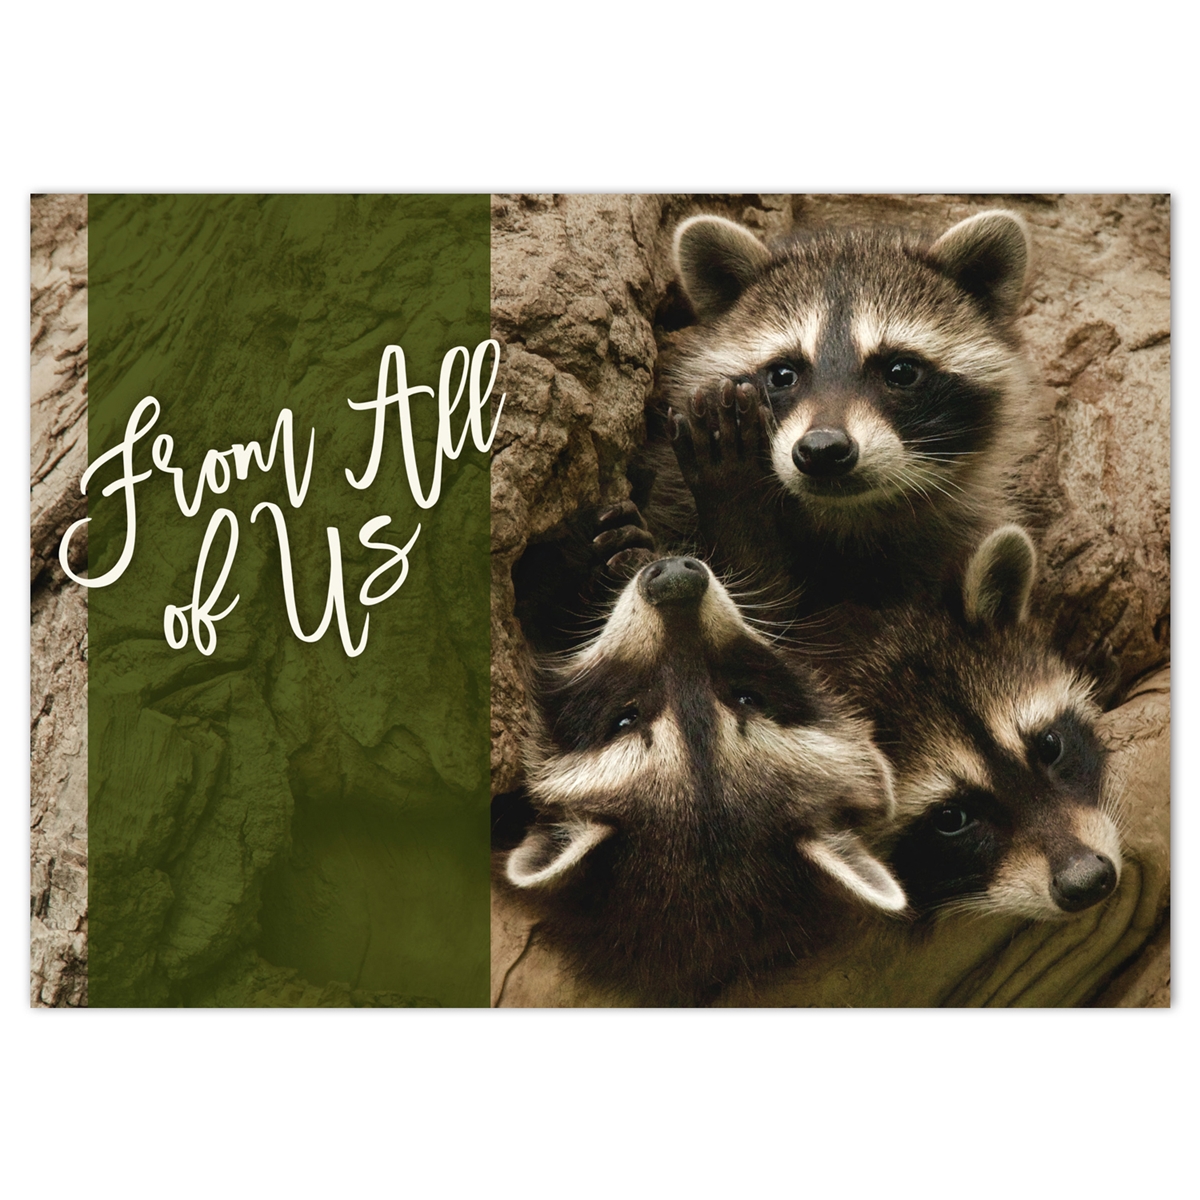 Raccoon Kits in Den Holiday Cards